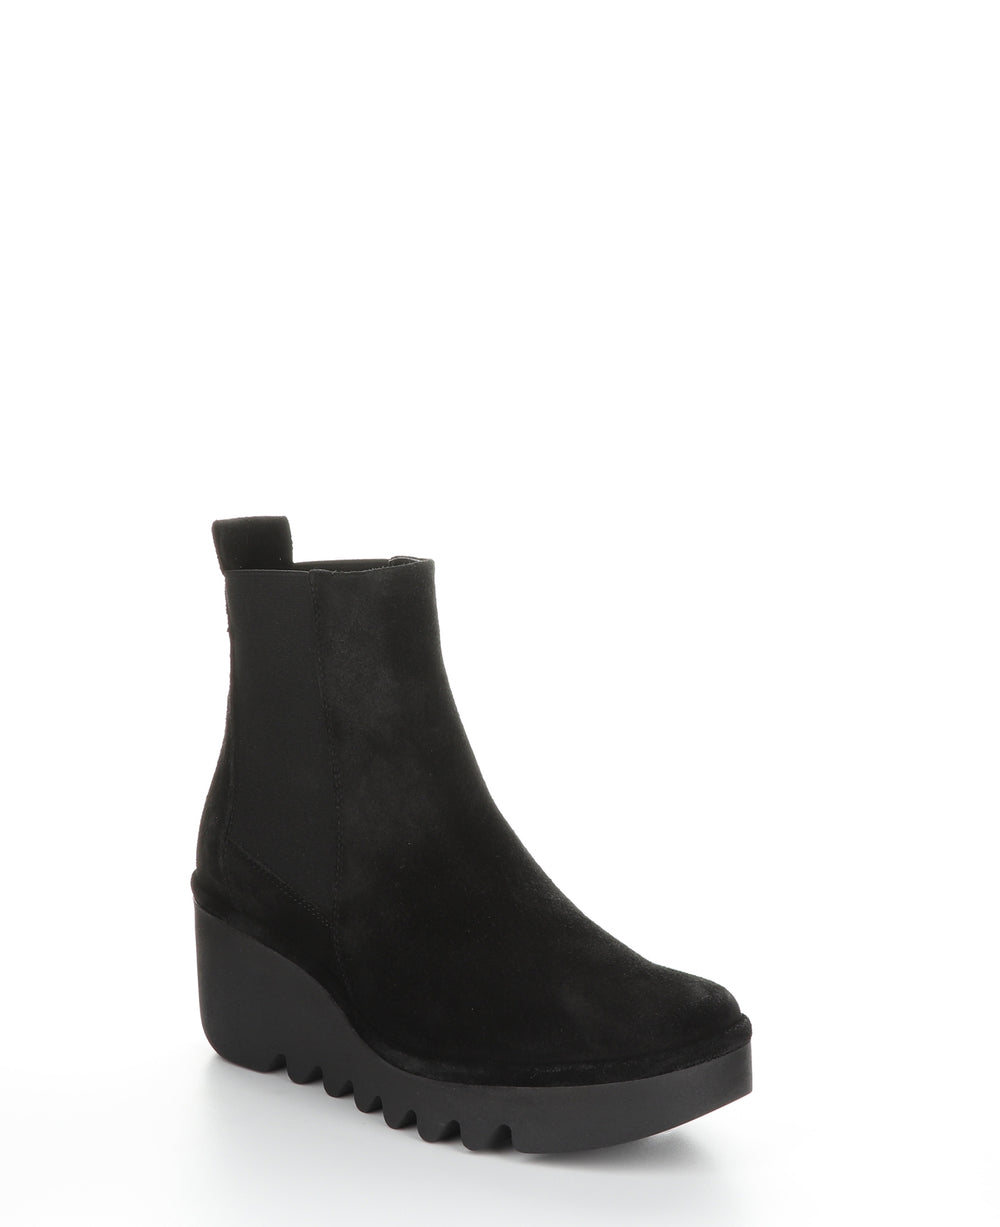 BAGU233FLY OILSUEDE BLACK Chelsea Ankle Boots